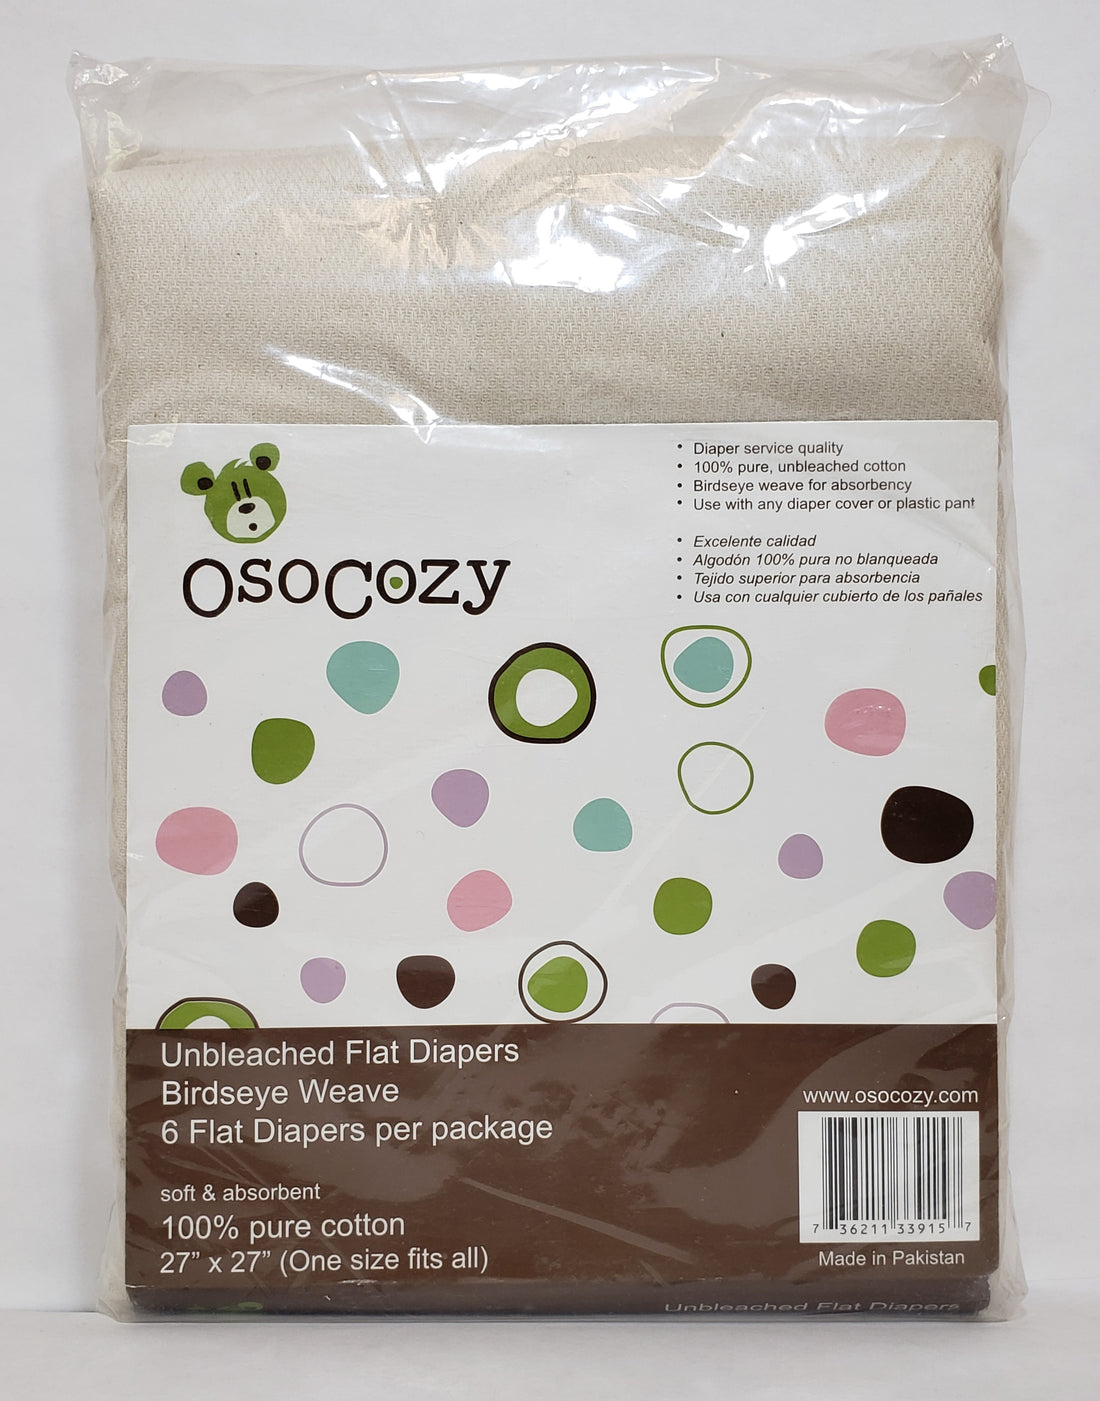 OsoCozy Unbleached Birdseye Flat Diapers, 6 Pack